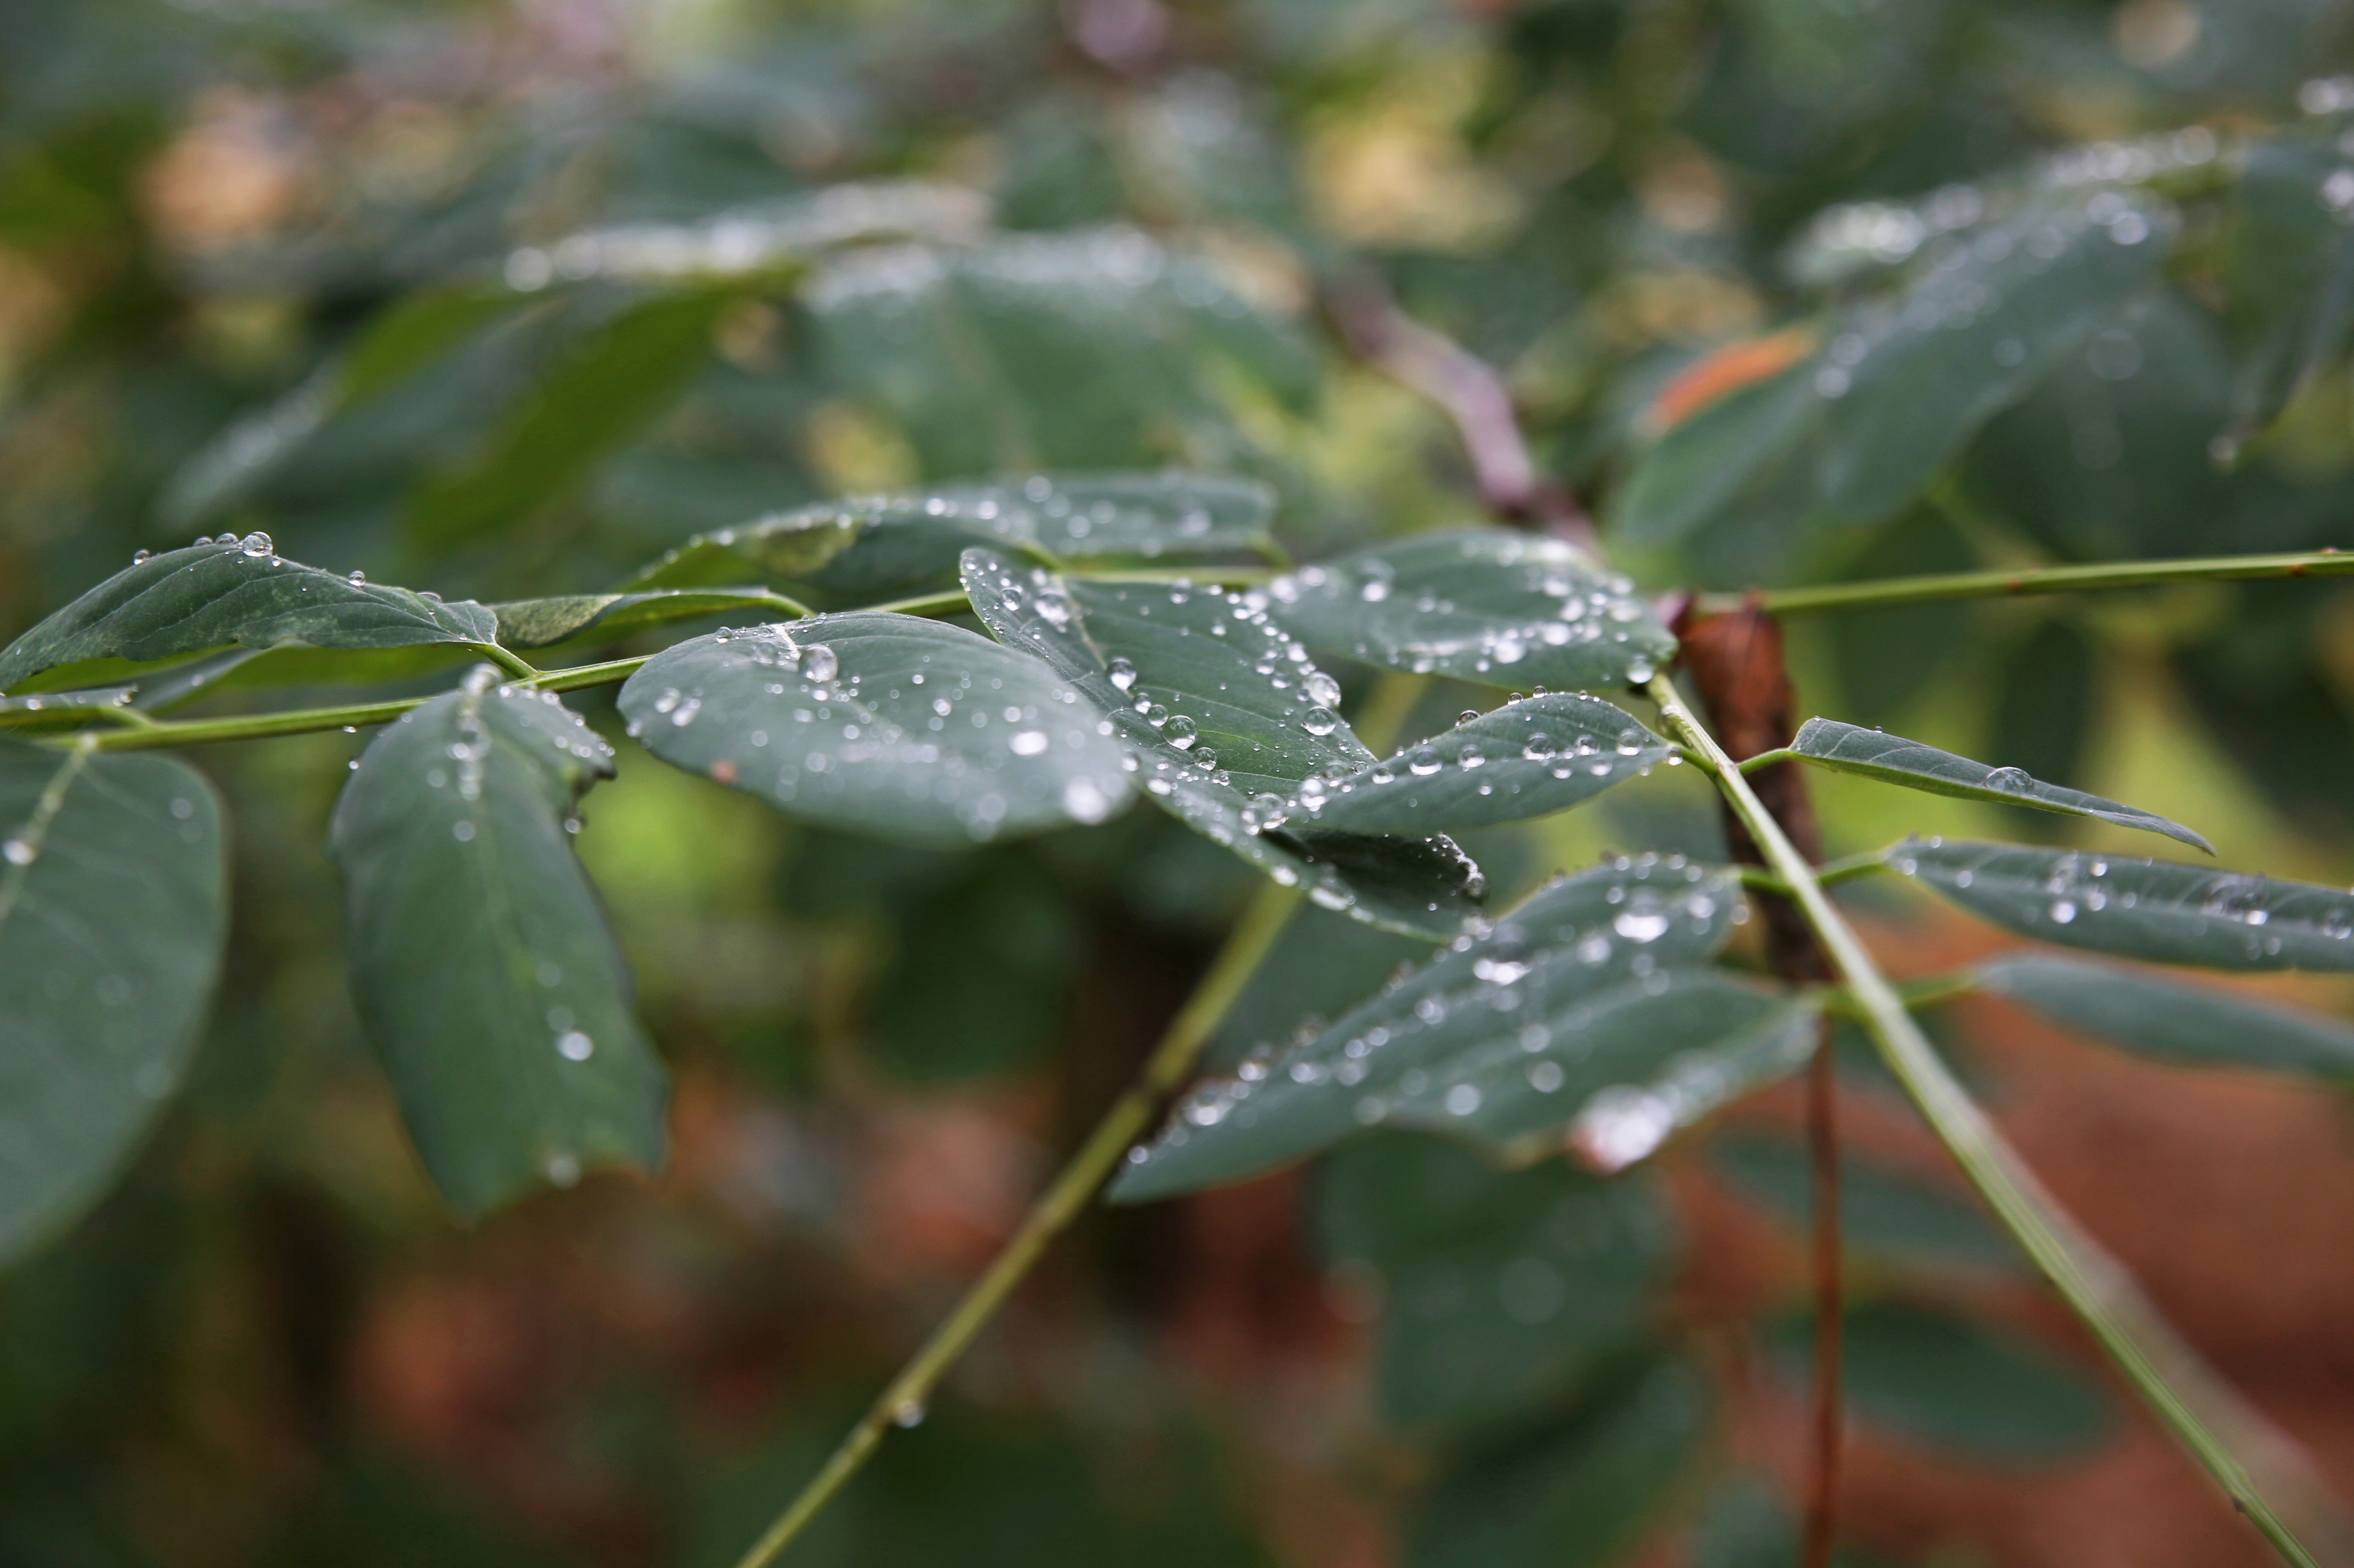 General 5469x3644 nature leaves dew depth of field water drops